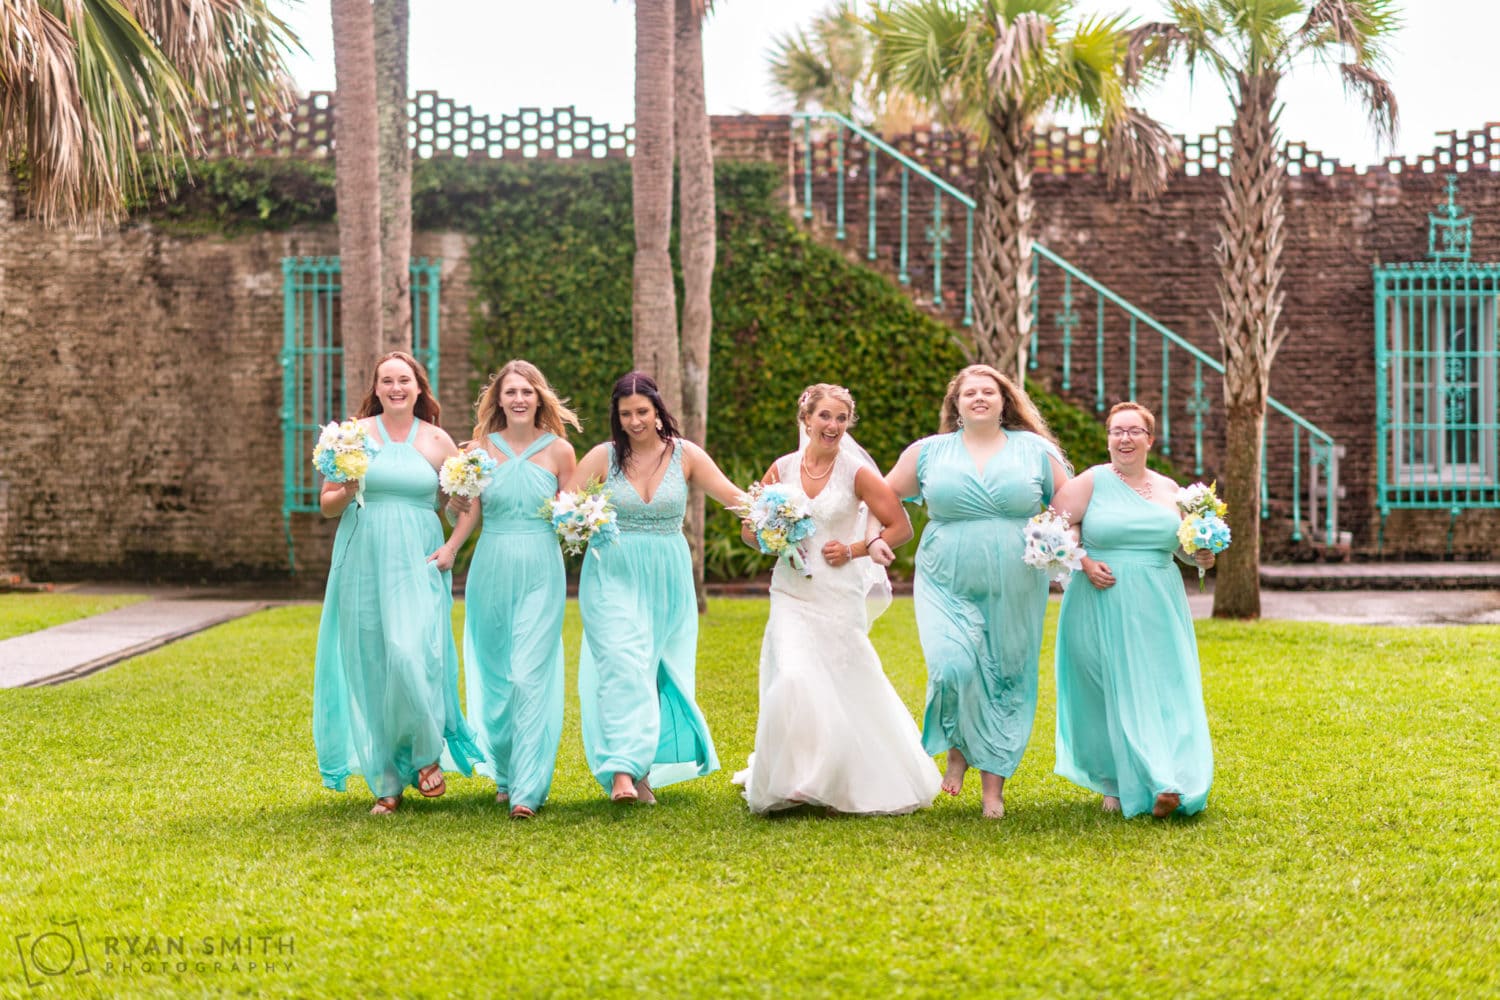 Bridesmaids skipping together with arms linked  - Atalaya Castle - Huntington Beach State Park